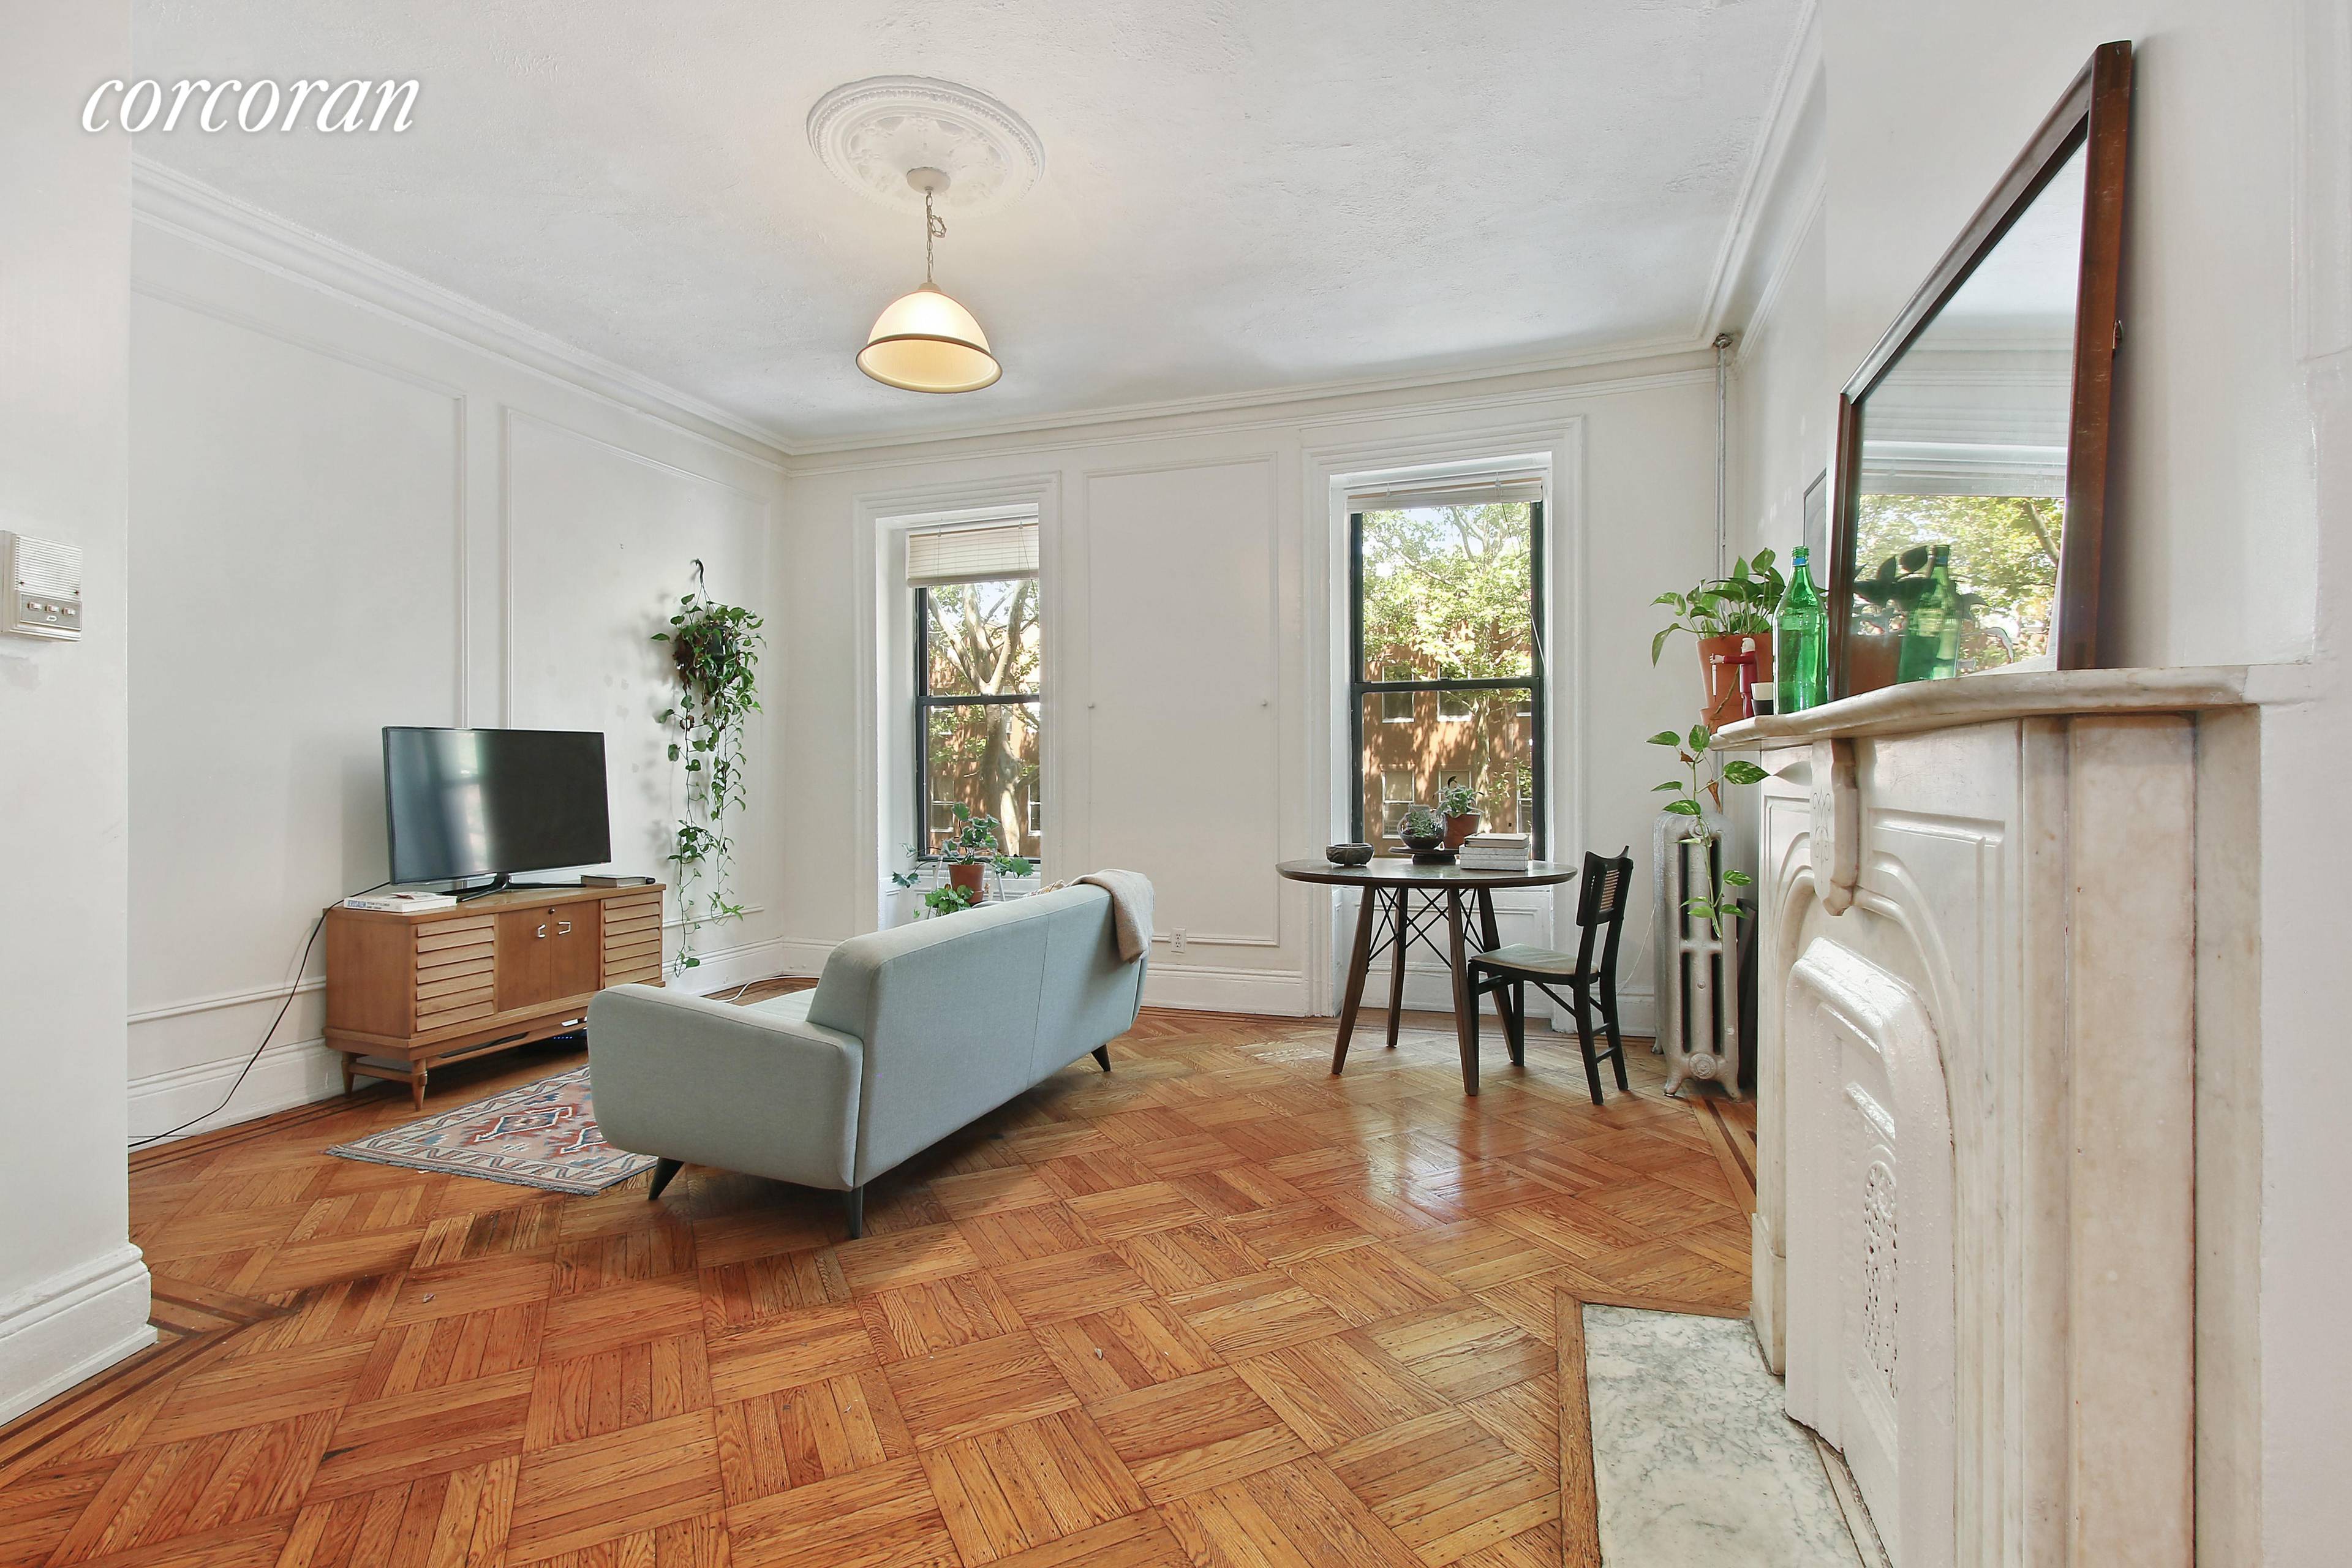 Located centrally in Clinton Hill, this floor through two bedroom has received a new renovation.